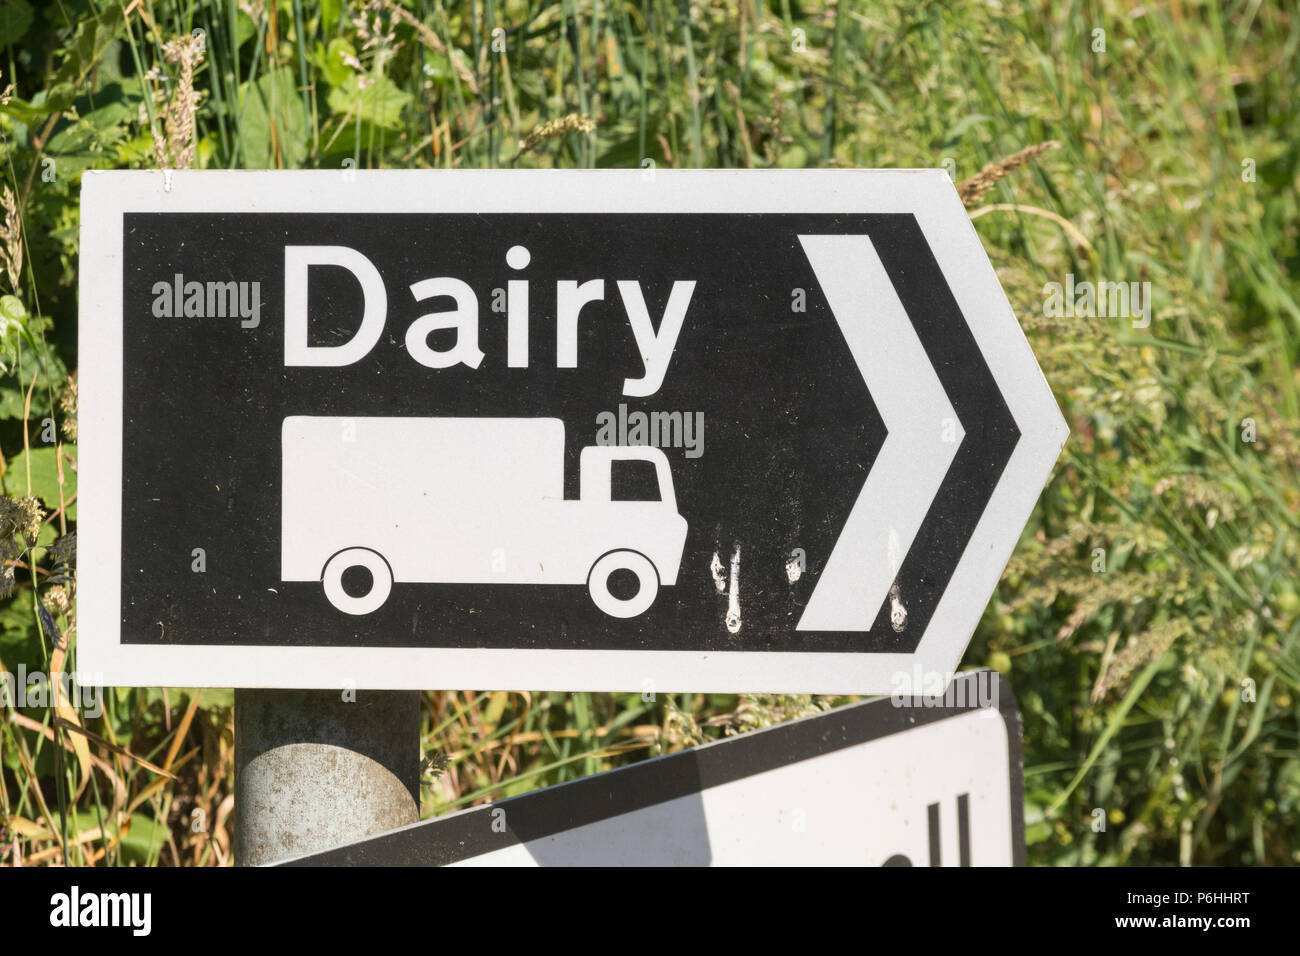 Sign to a dairy on a rural country road. Metaphor for the British Dairy industry, and UK milk production. Stock Photo